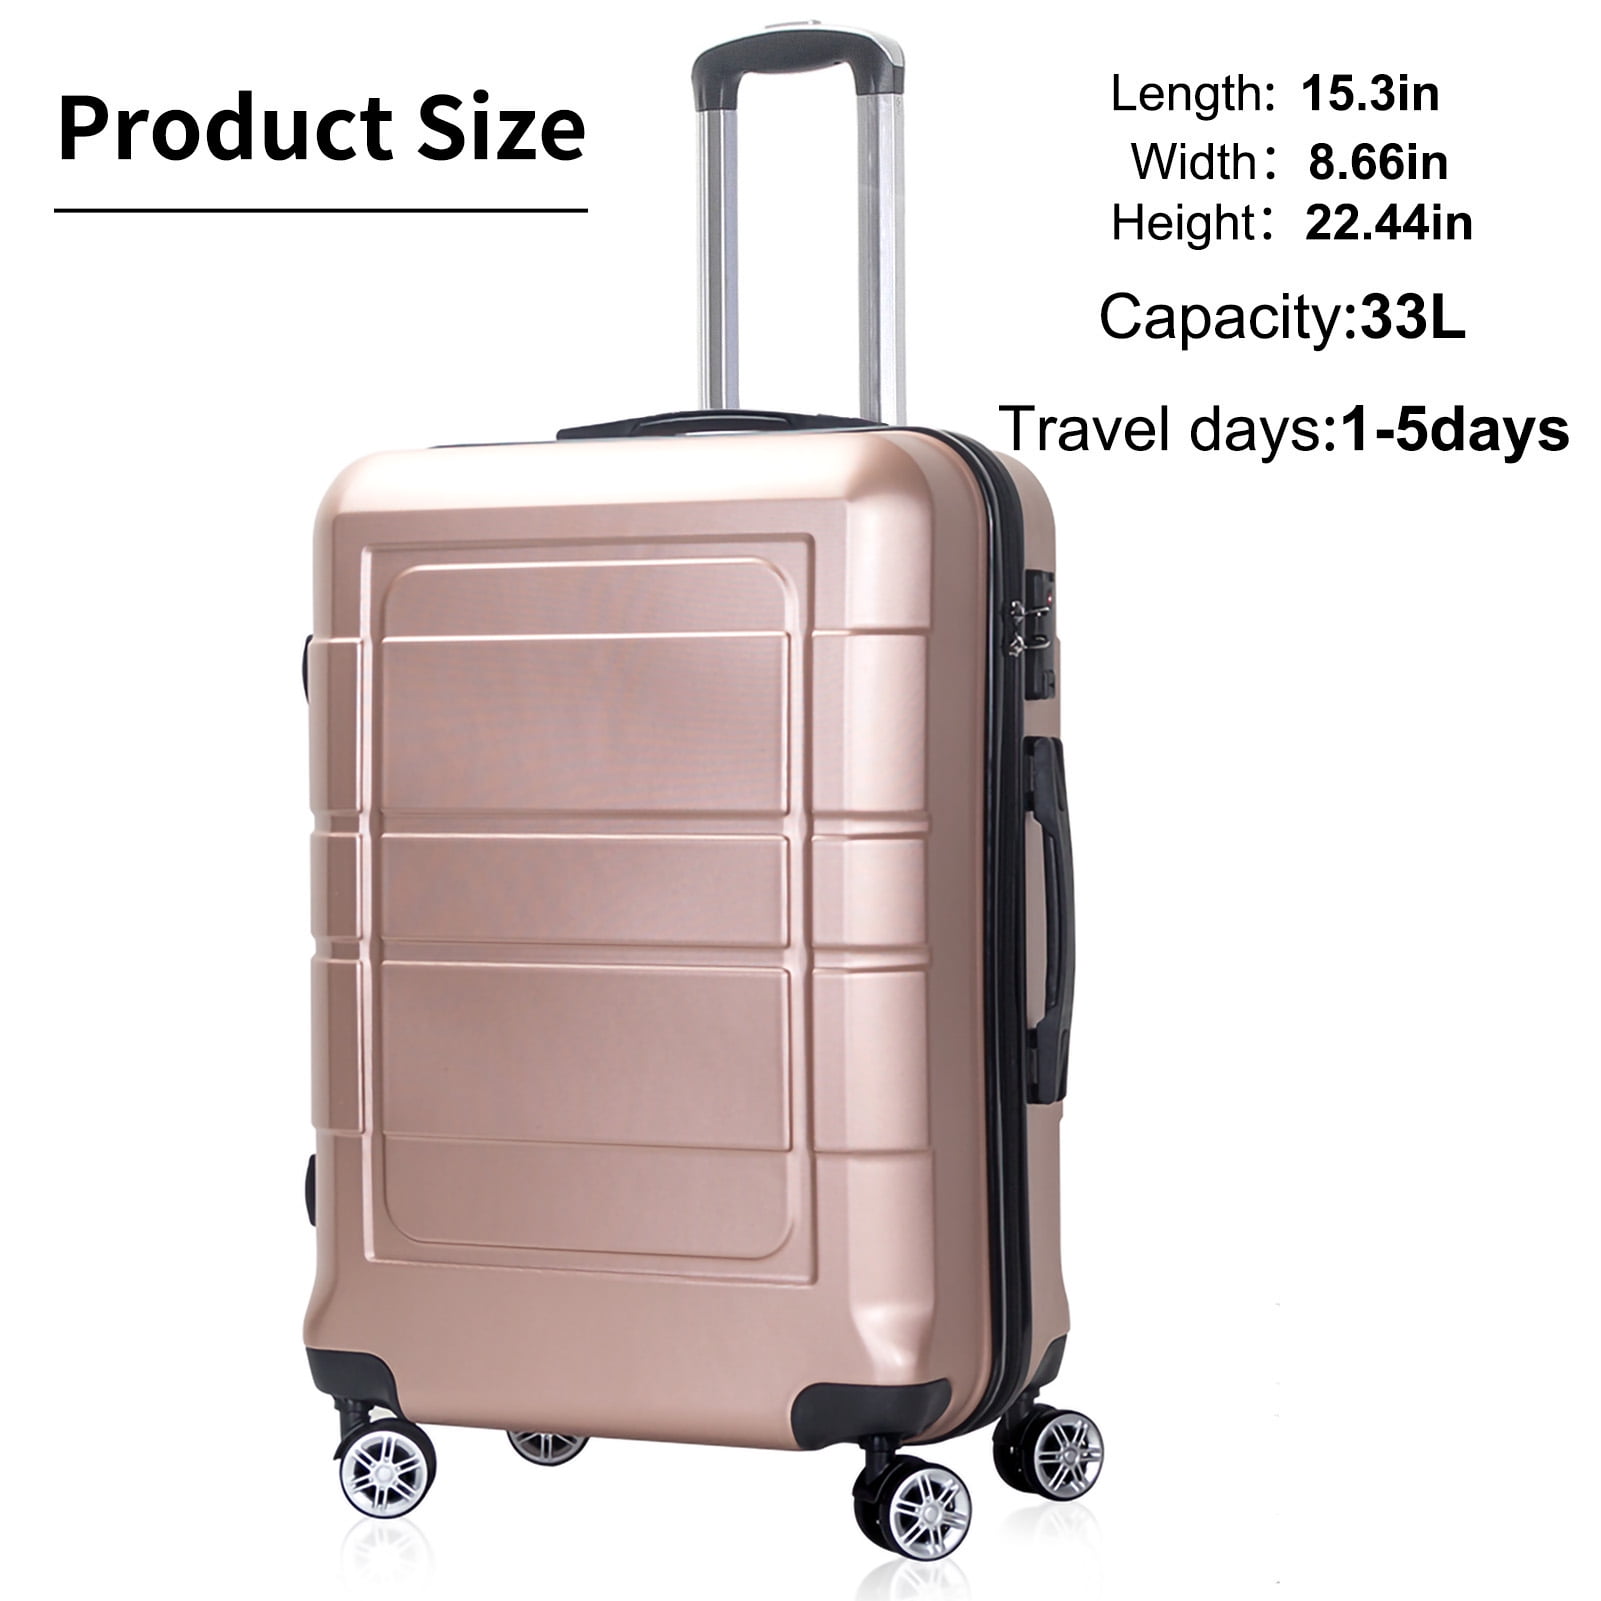 Hanke Carry Luggage, Hanke 2021 Suitcase, Business Carry